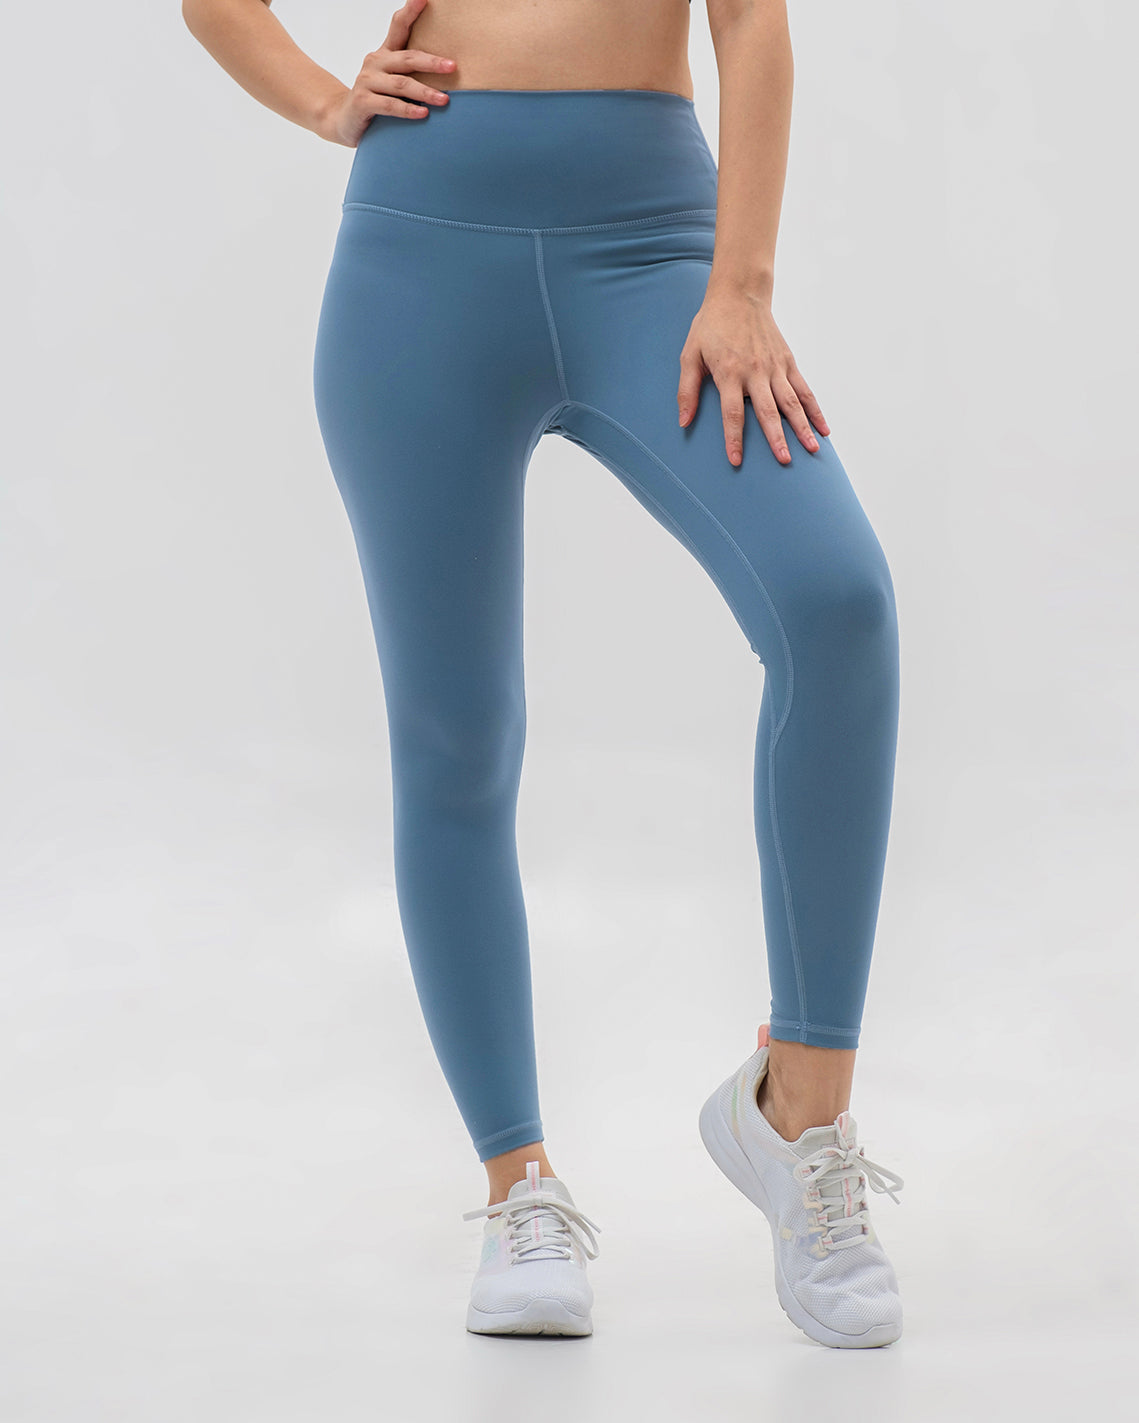 Fit review of @sweetlegs Free Motion leggings! Thank you for letting m